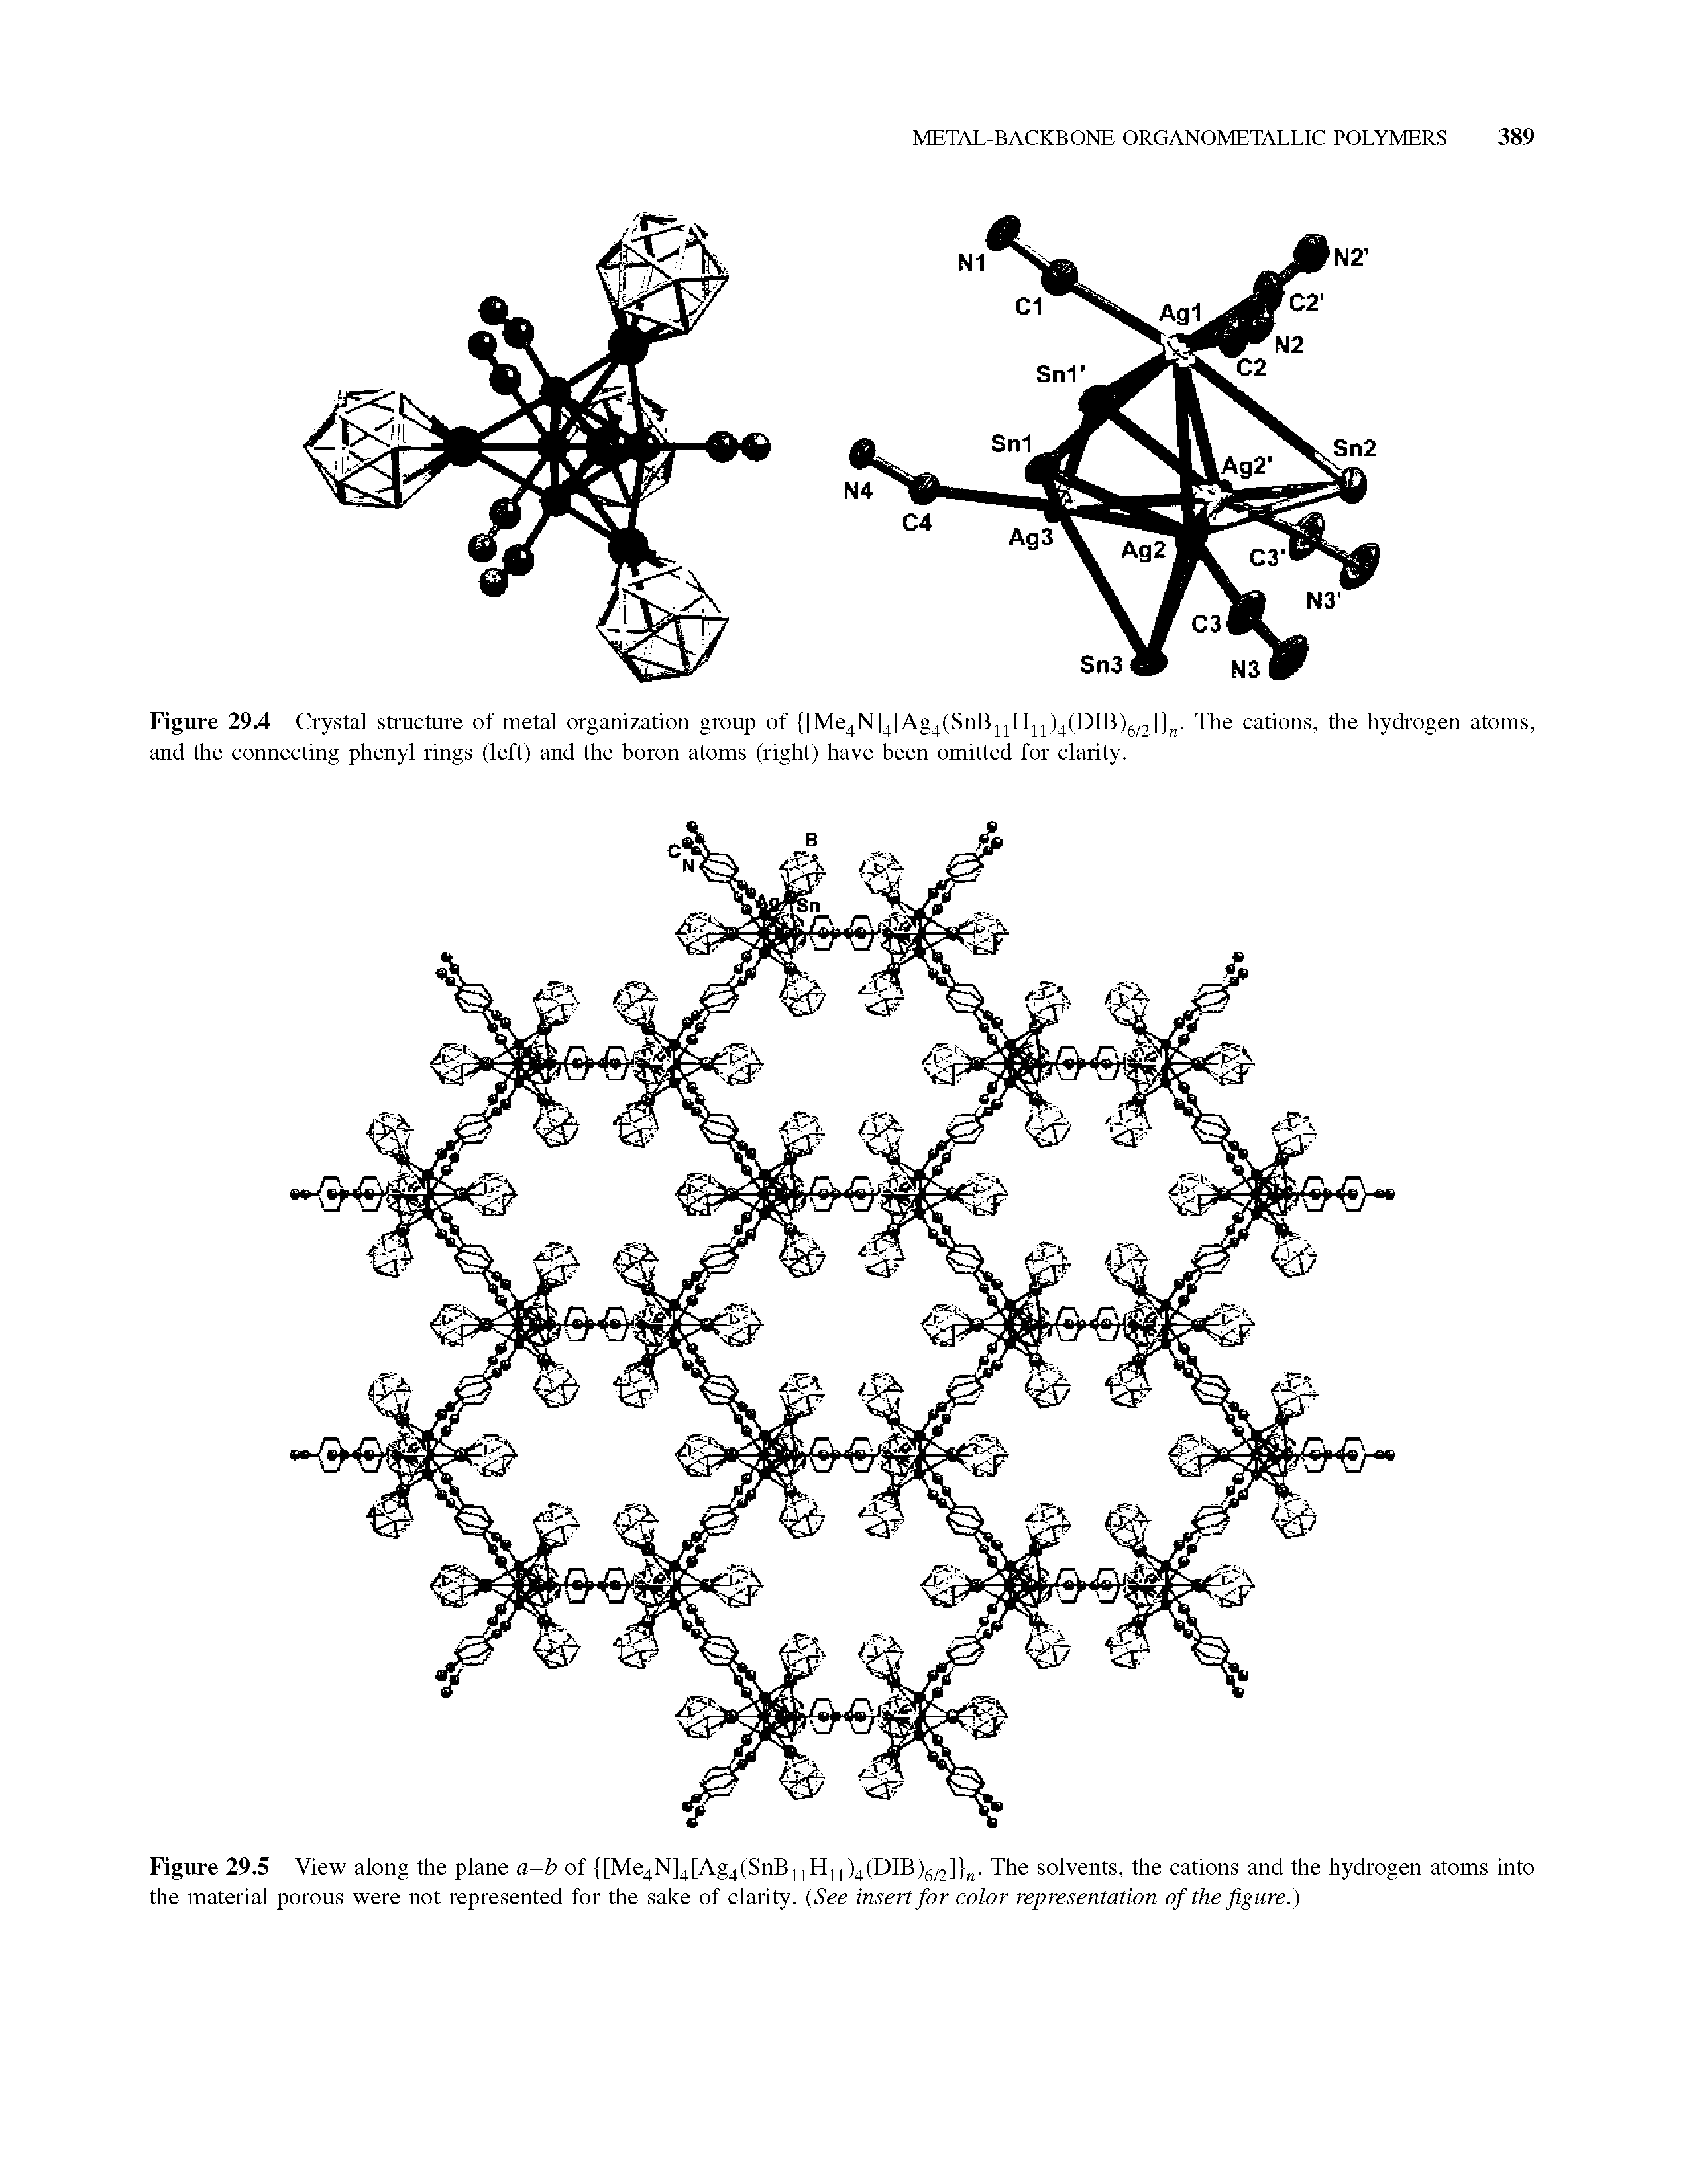 Figure 29.5 View along the plane a-b of [Me4N]4[Ag4(SnBjjHjj)4(DIB)gQ] . The solvents, the cations and the hydrogen atoms into the material porous were not represented for the sake of clarity. (See insert for color representation of the figure.)...